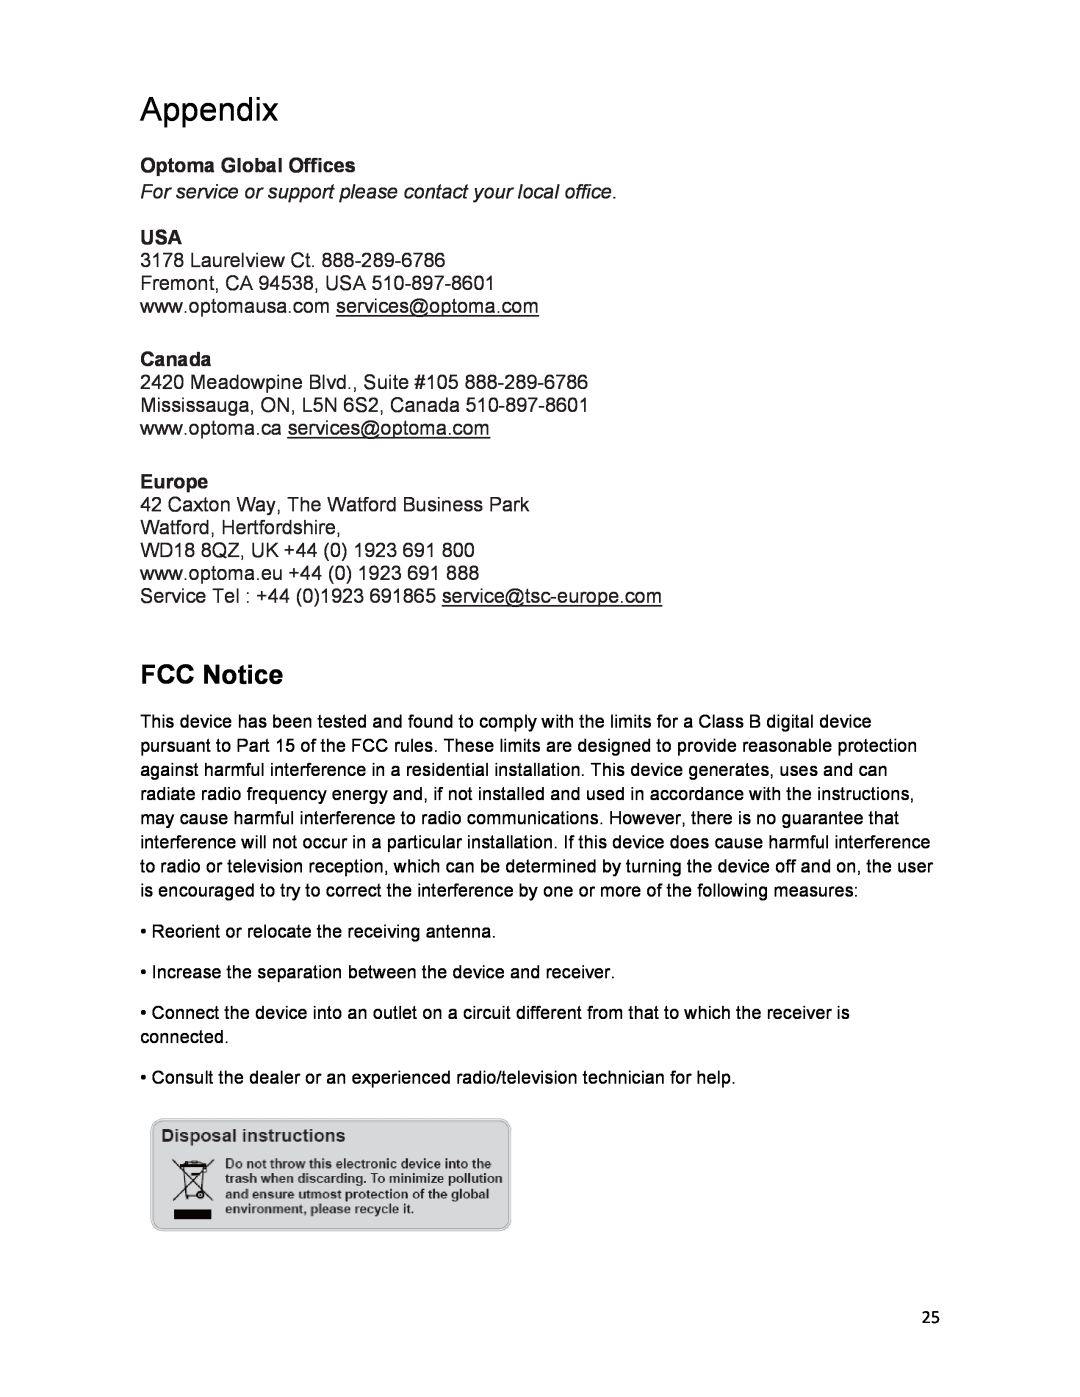 Optoma Technology Q300 manual FCC Notice, Appendix, Optoma Global Offices, Canada, Europe 